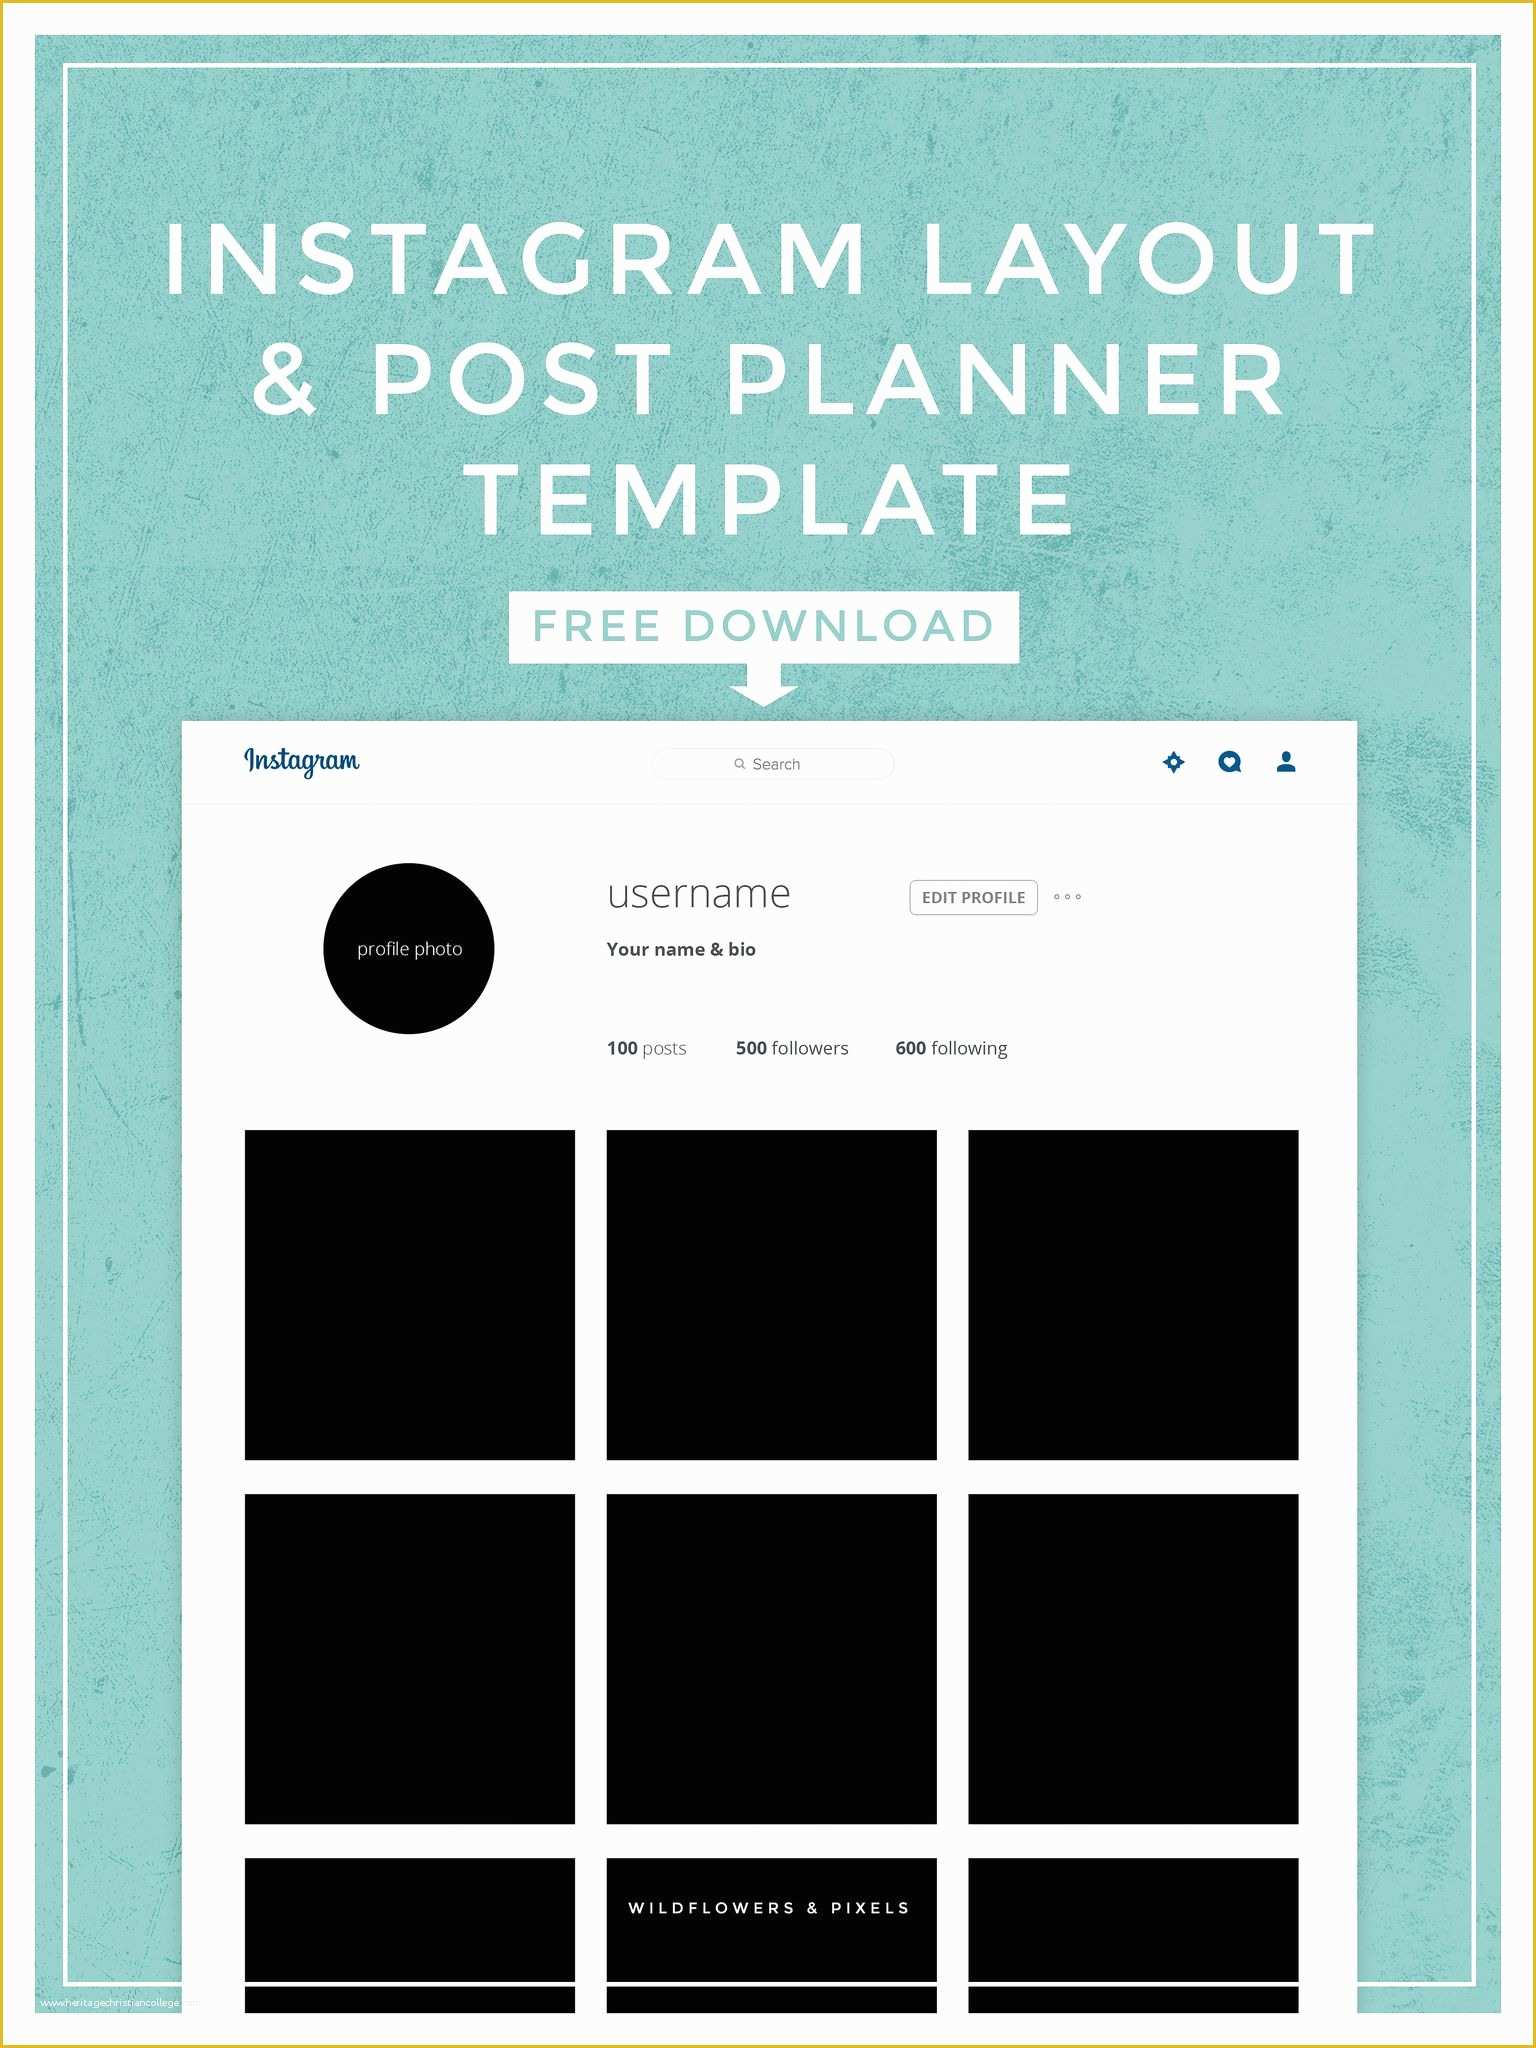 Free Instagram Templates Of Instagram Layout & Post Planner Template Free Psd